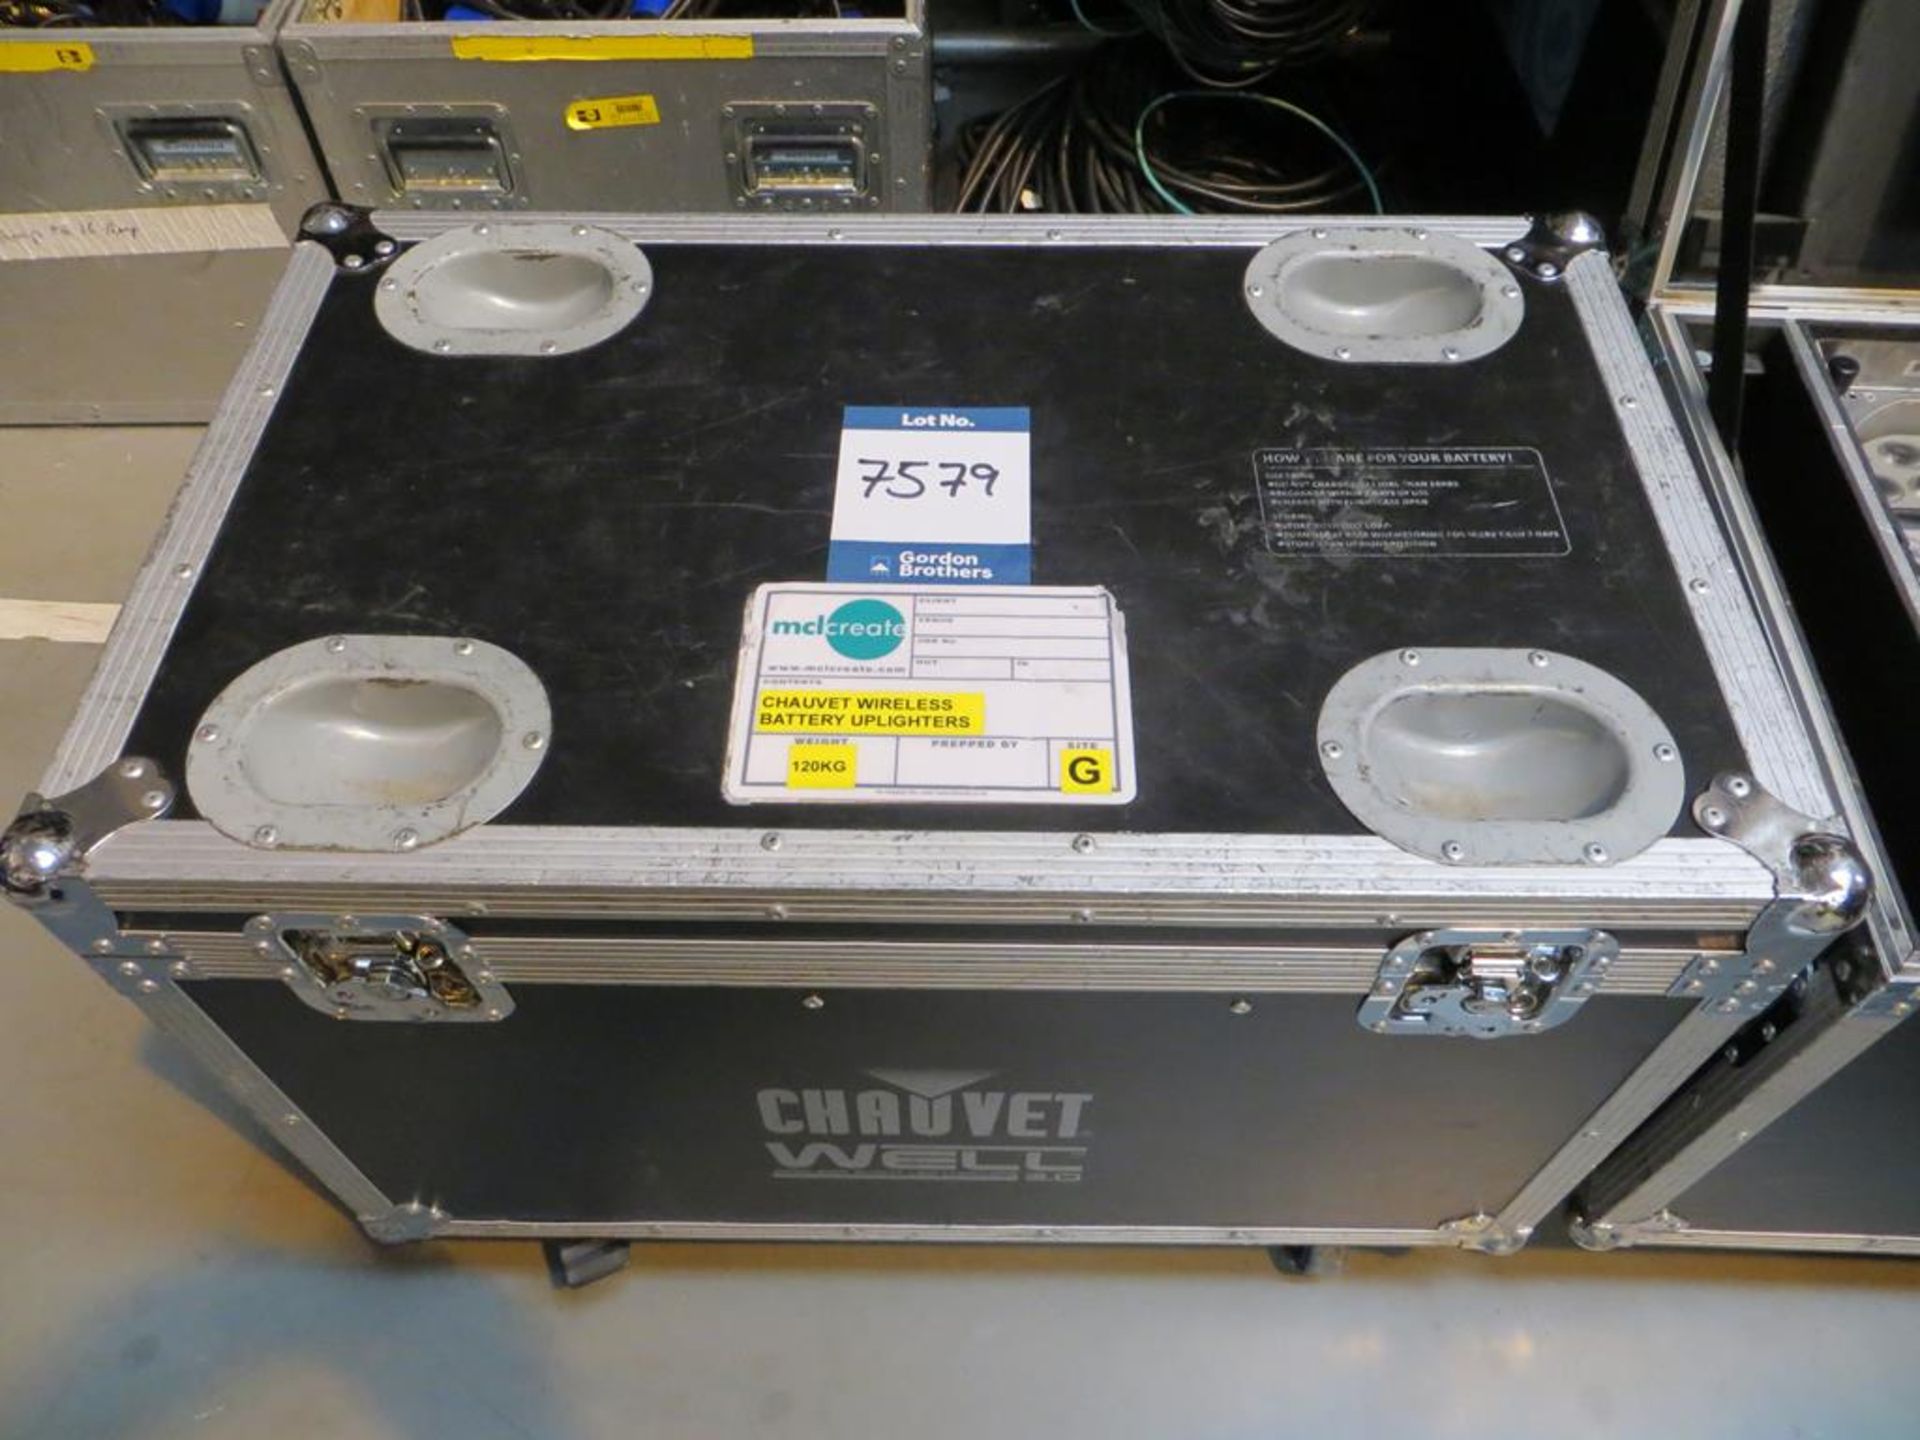 6x No. Chauvet, Well 2.0 battery LED wireless DMX in powered transit case: Unit C Moorside, 40 - Image 4 of 4